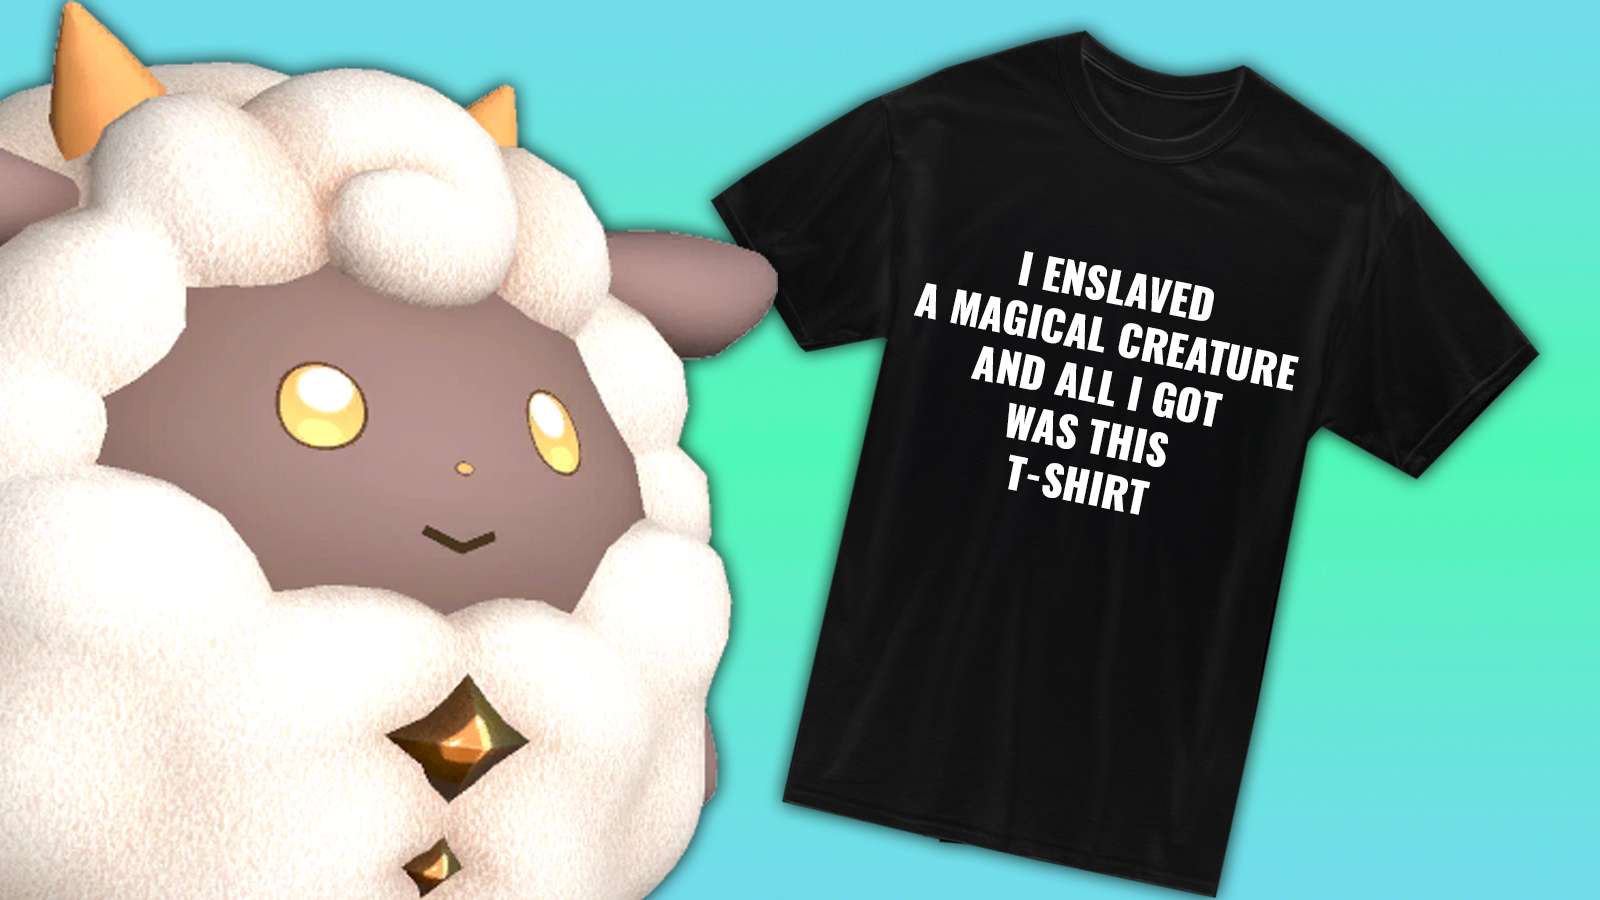 palworld lamball next to a black shirt that says "I ENSLAVED A MAGICAL CREATURE AND ALL I GOT WAS THIS T-SHIRT"